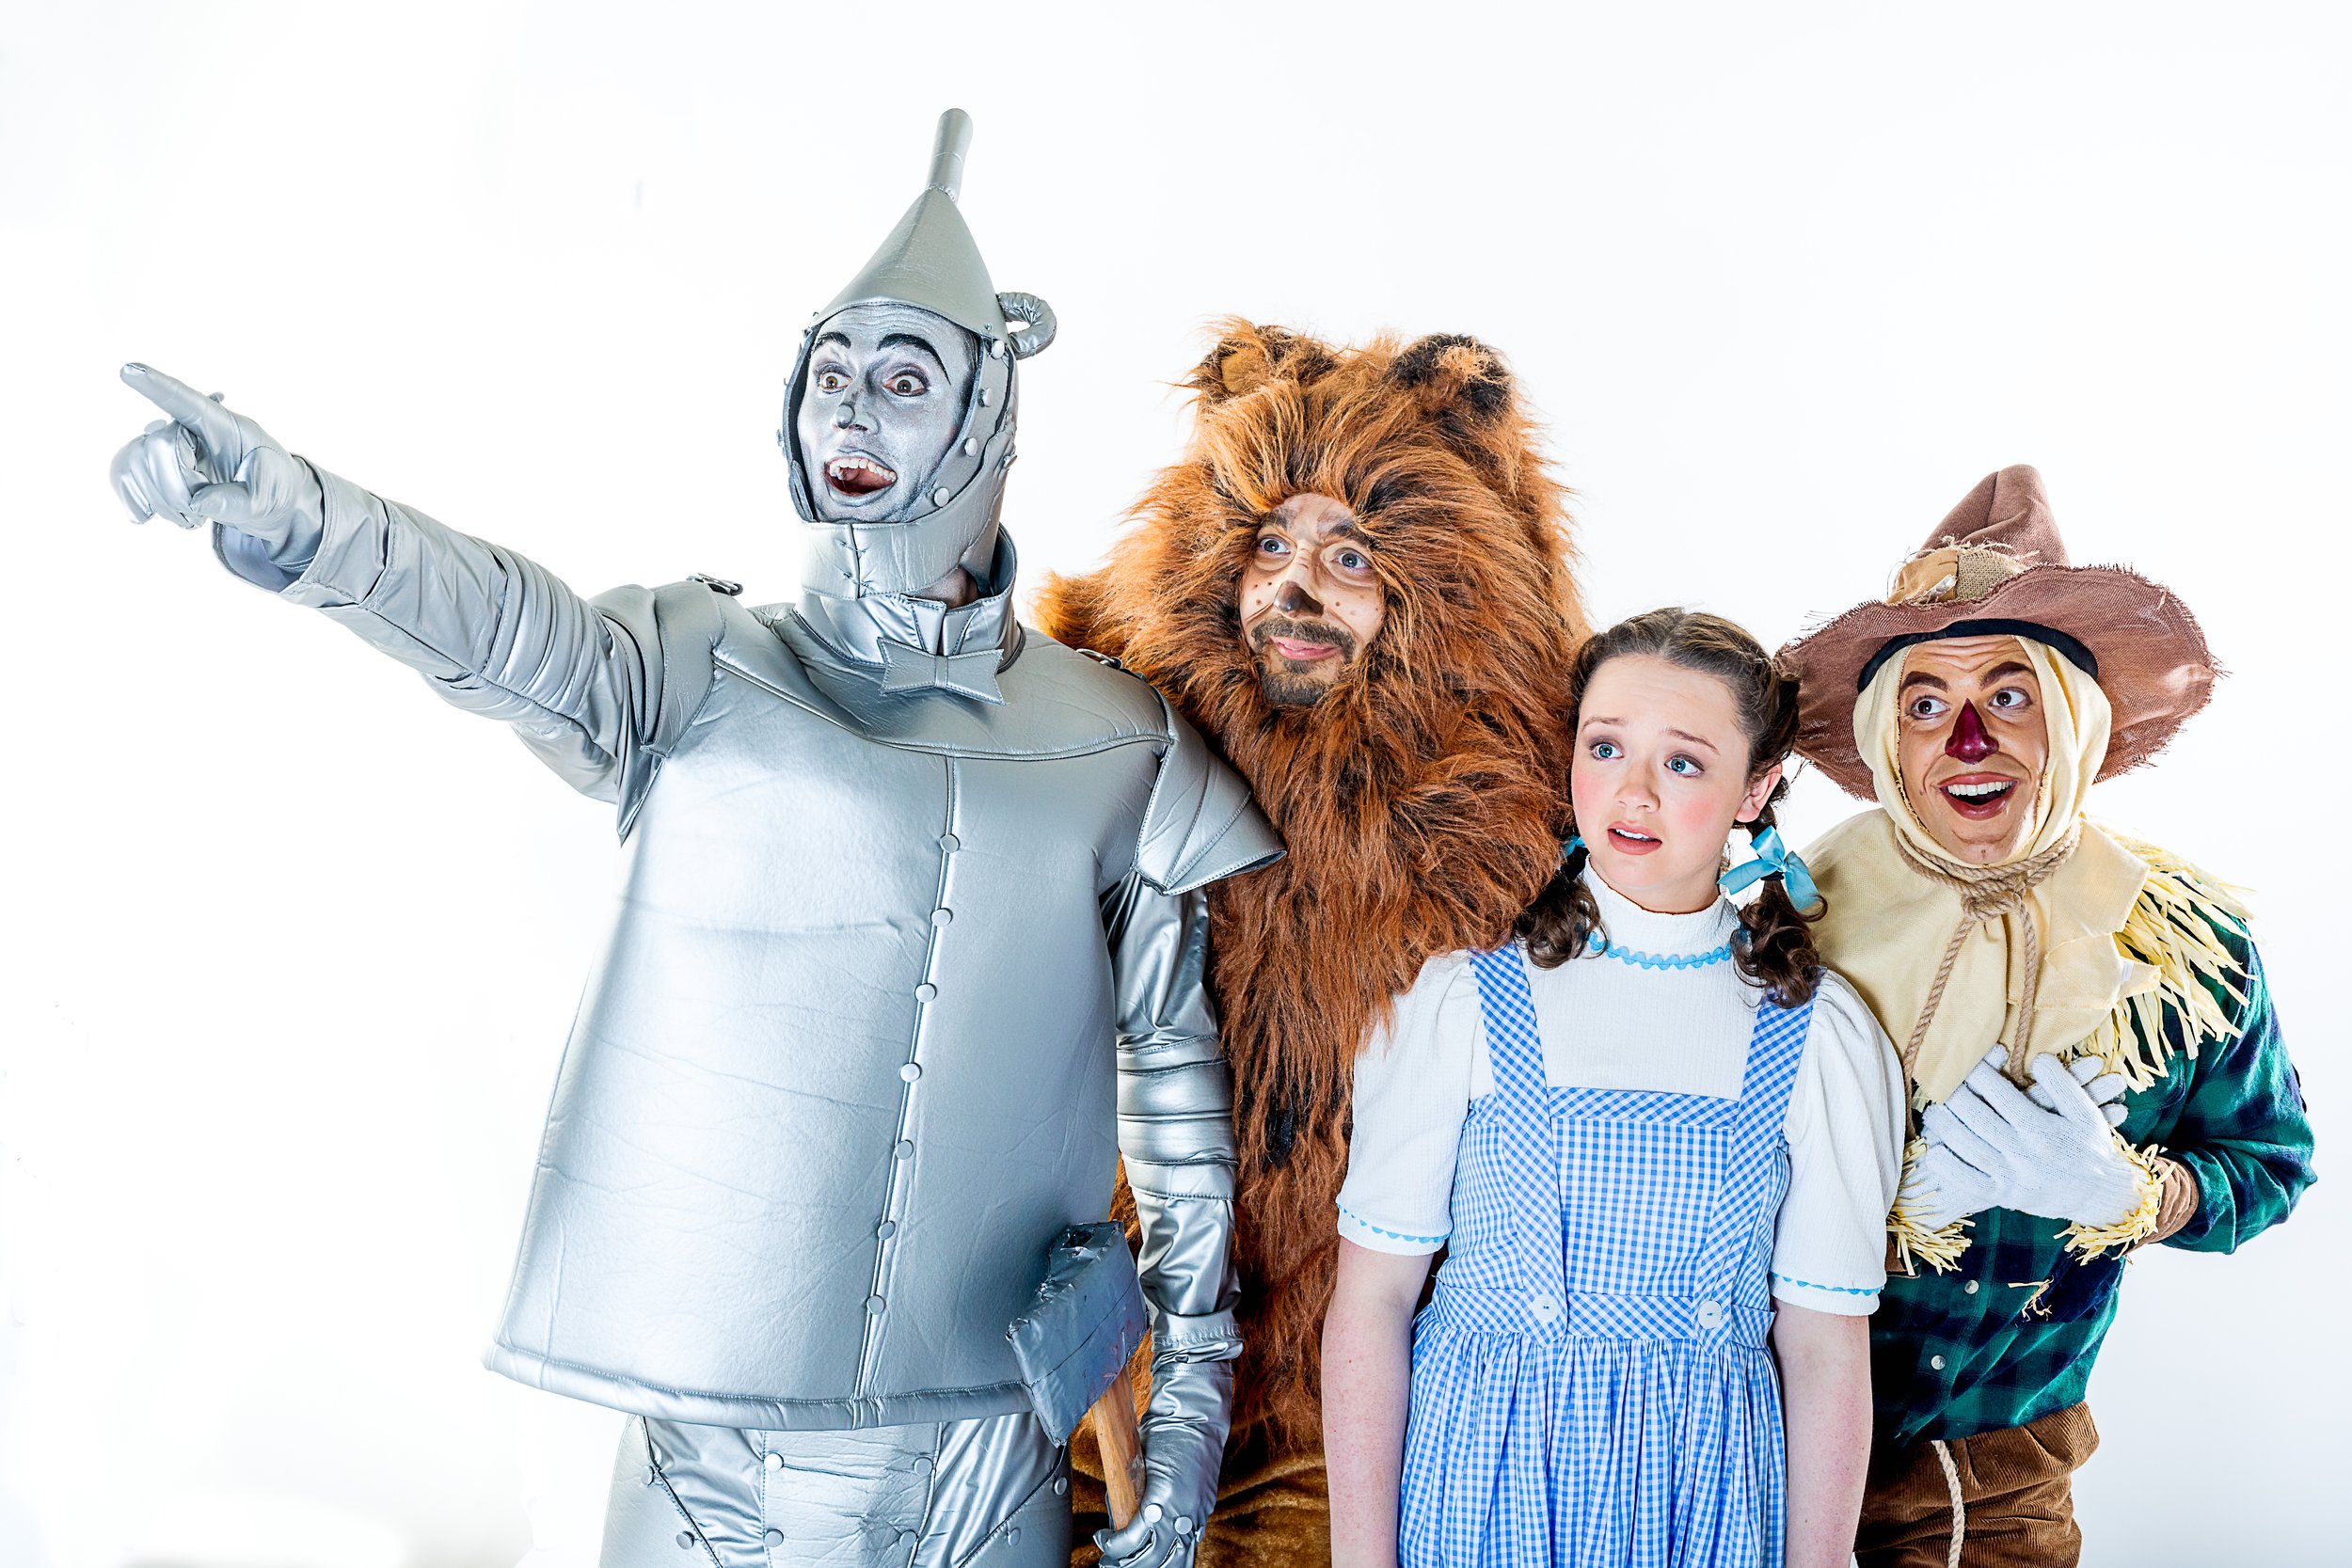 The Wizard of Oz hits the Granville Island Stage from November 3